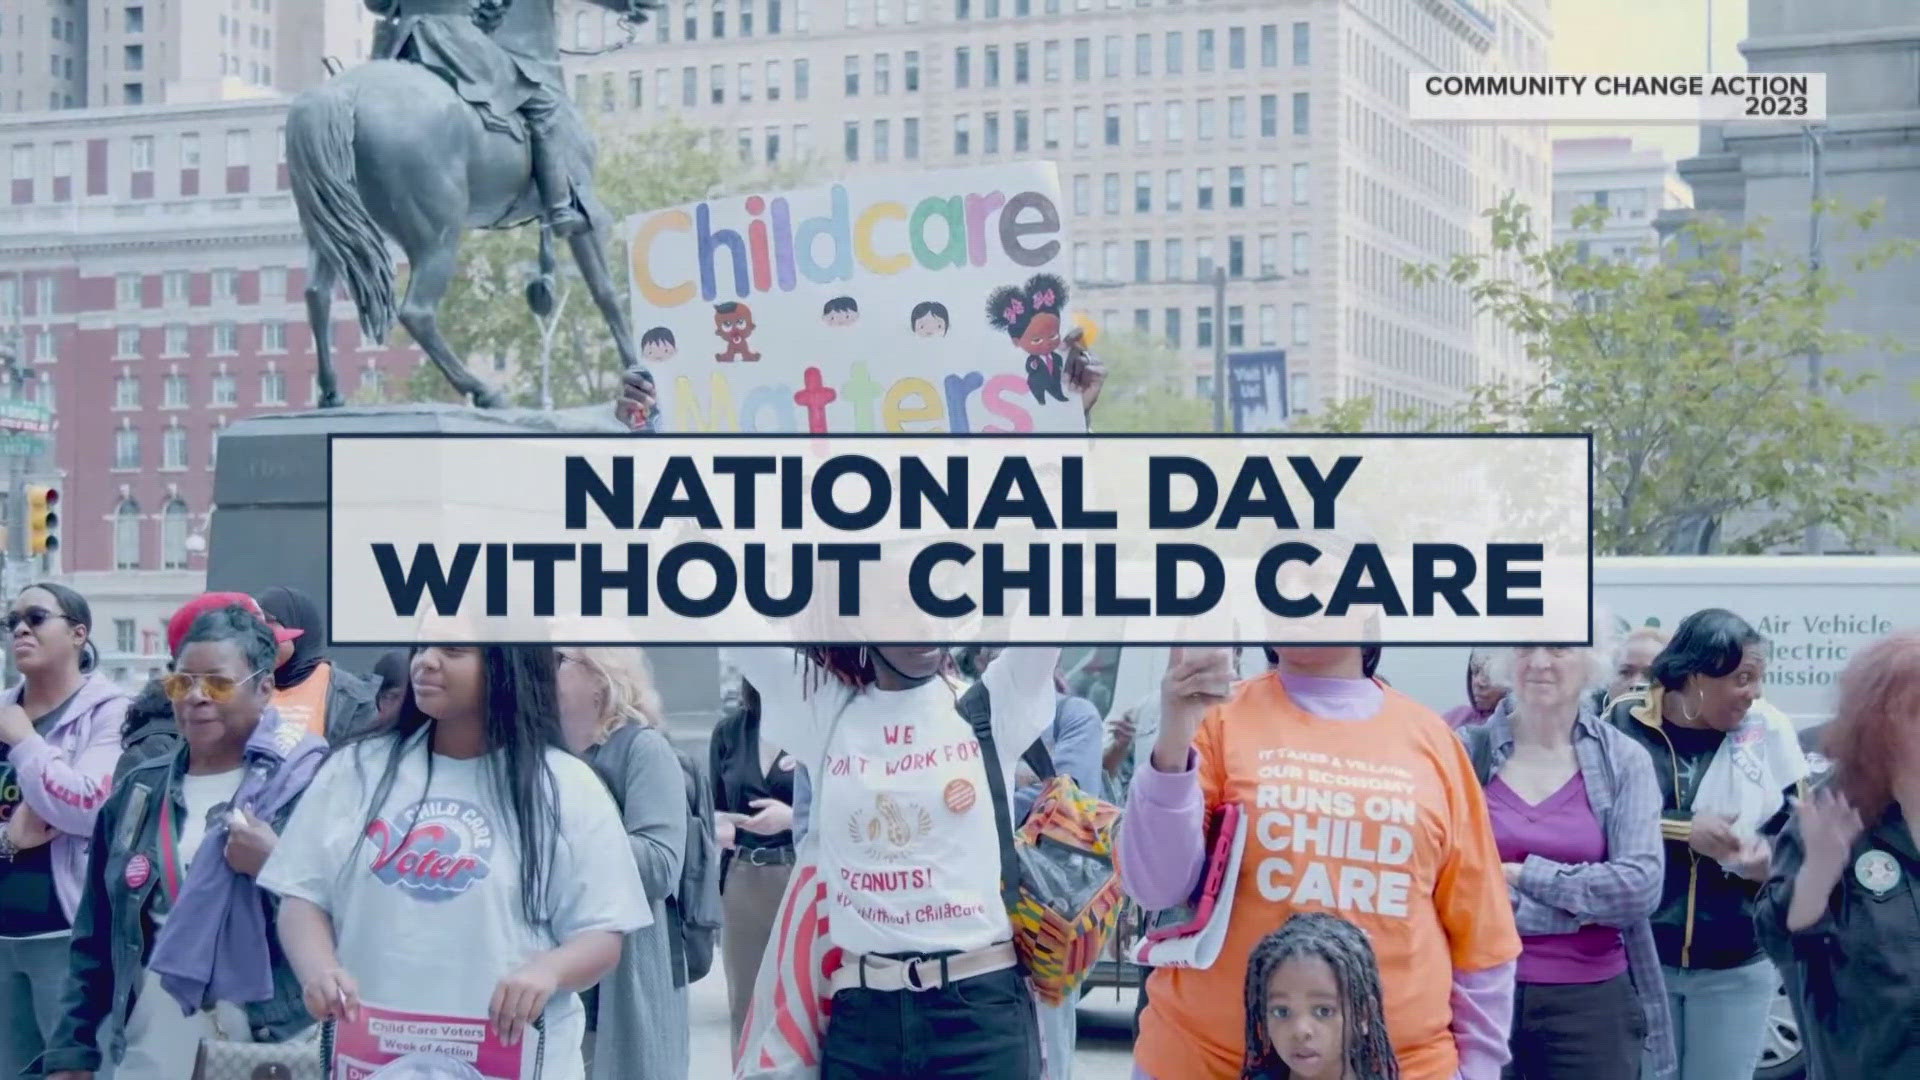 NBC's Christine Romans reports on National Day Without Child Care bringing a new push for accessible resources for families.